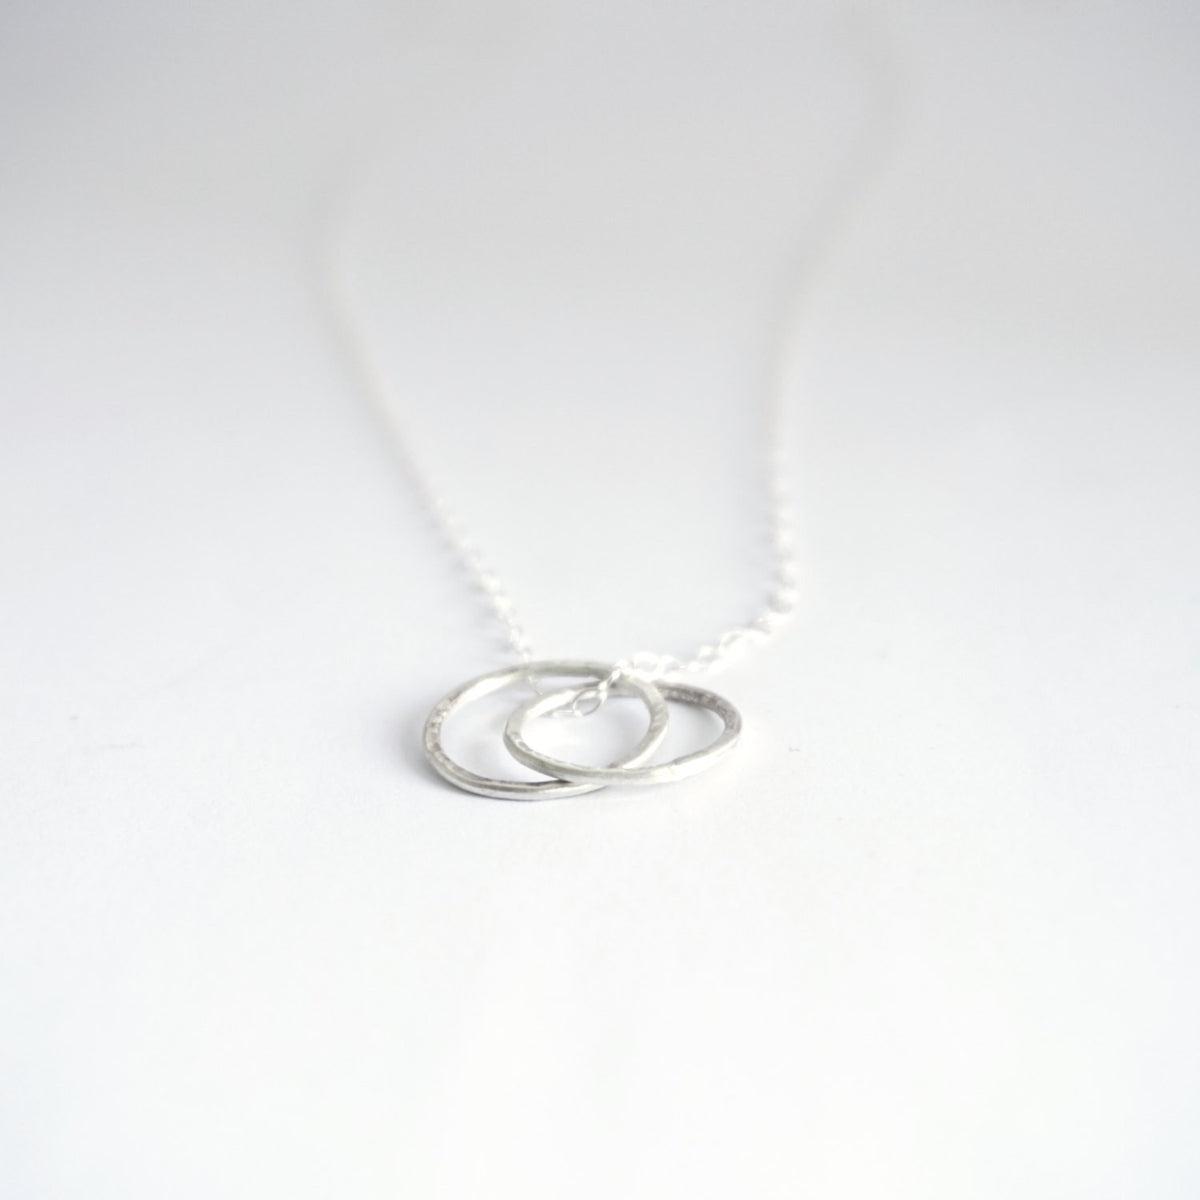 Celebrate Your Friendship With Hand-Crafted Sterling Silver Interlocking Circle Necklace  - 0142 - Virginia Wynne Designs